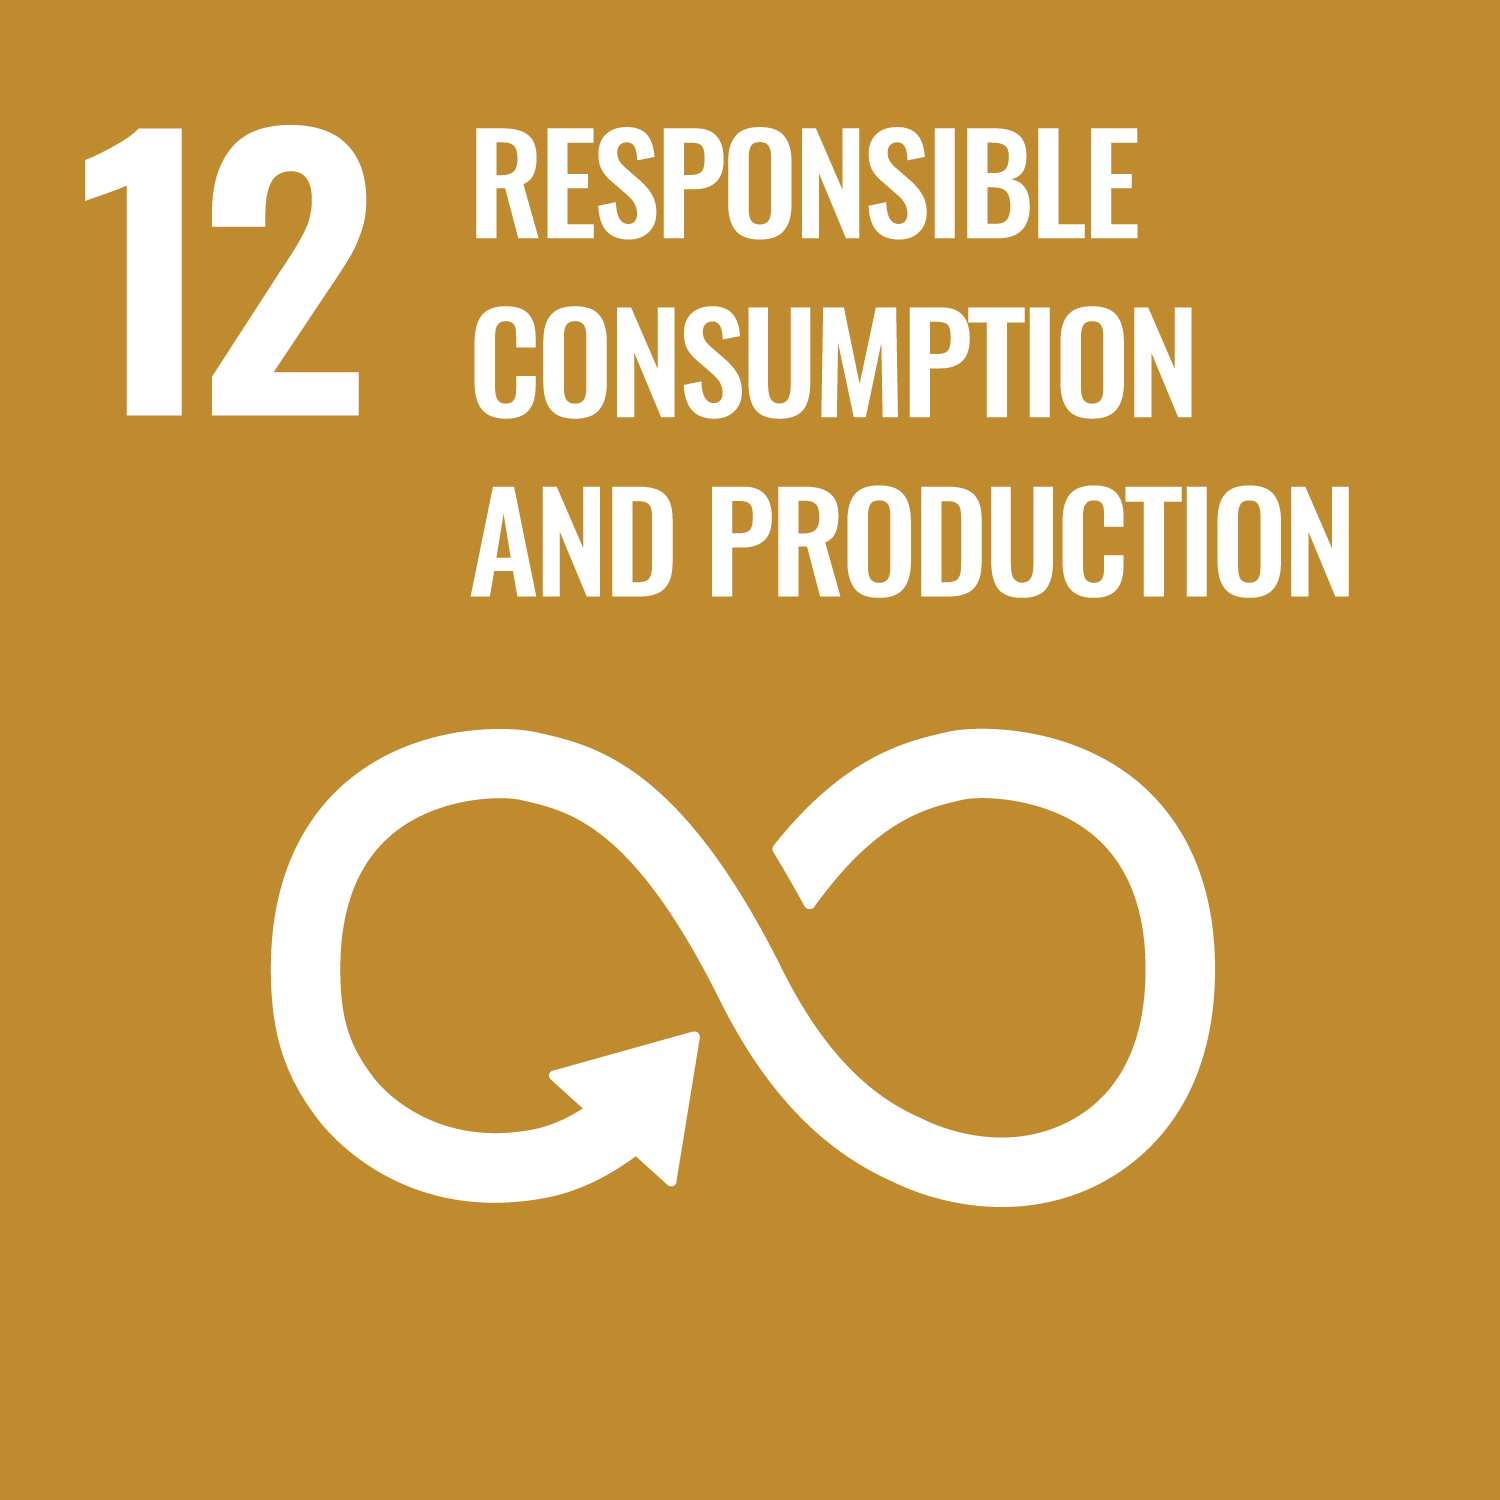 responsible consumption and production sustainable development goal - loose leaf tea